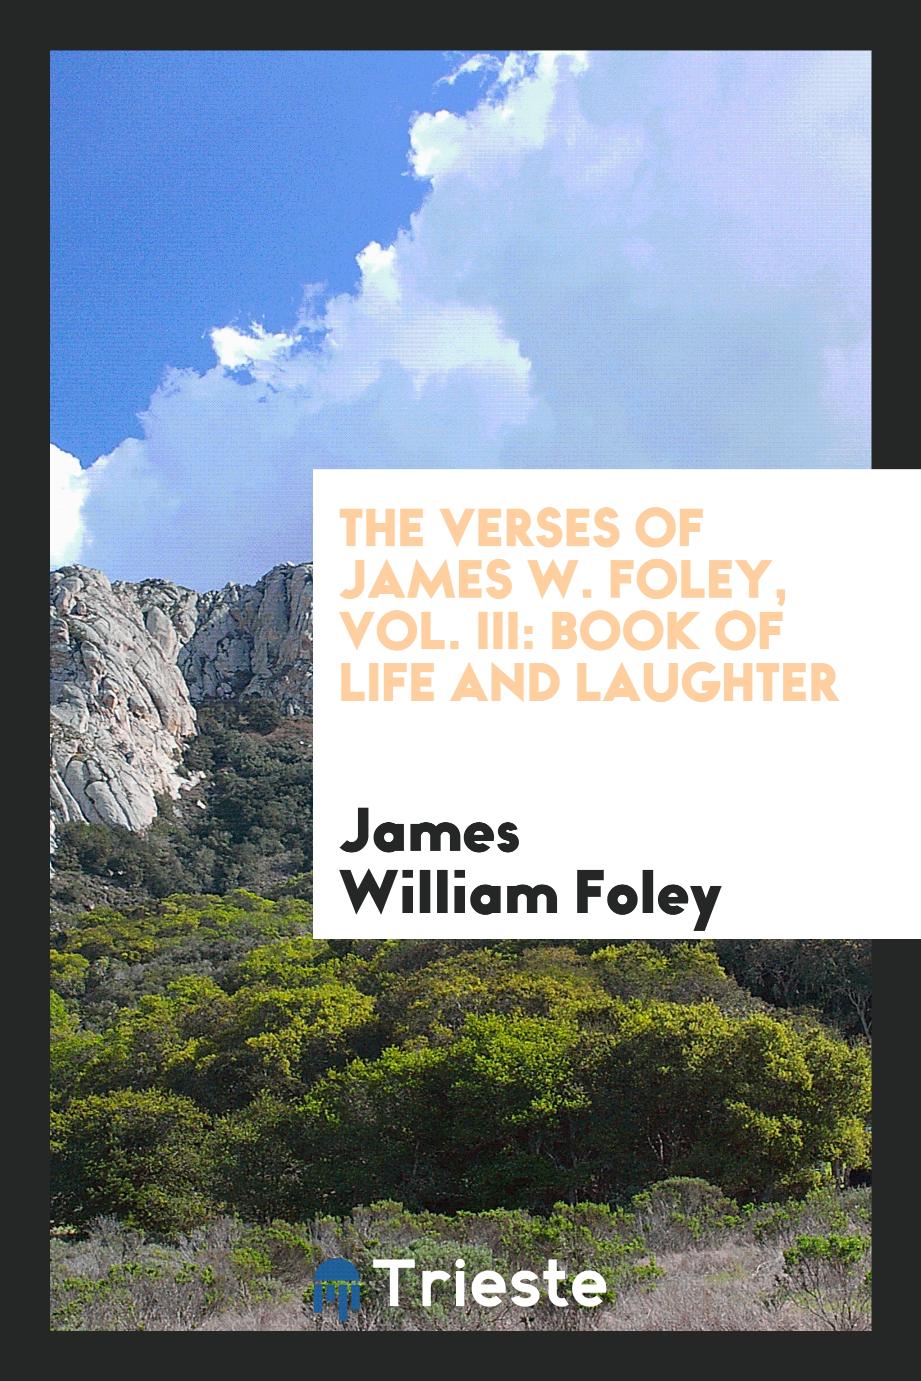 The Verses of James W. Foley, Vol. III: Book of Life and Laughter